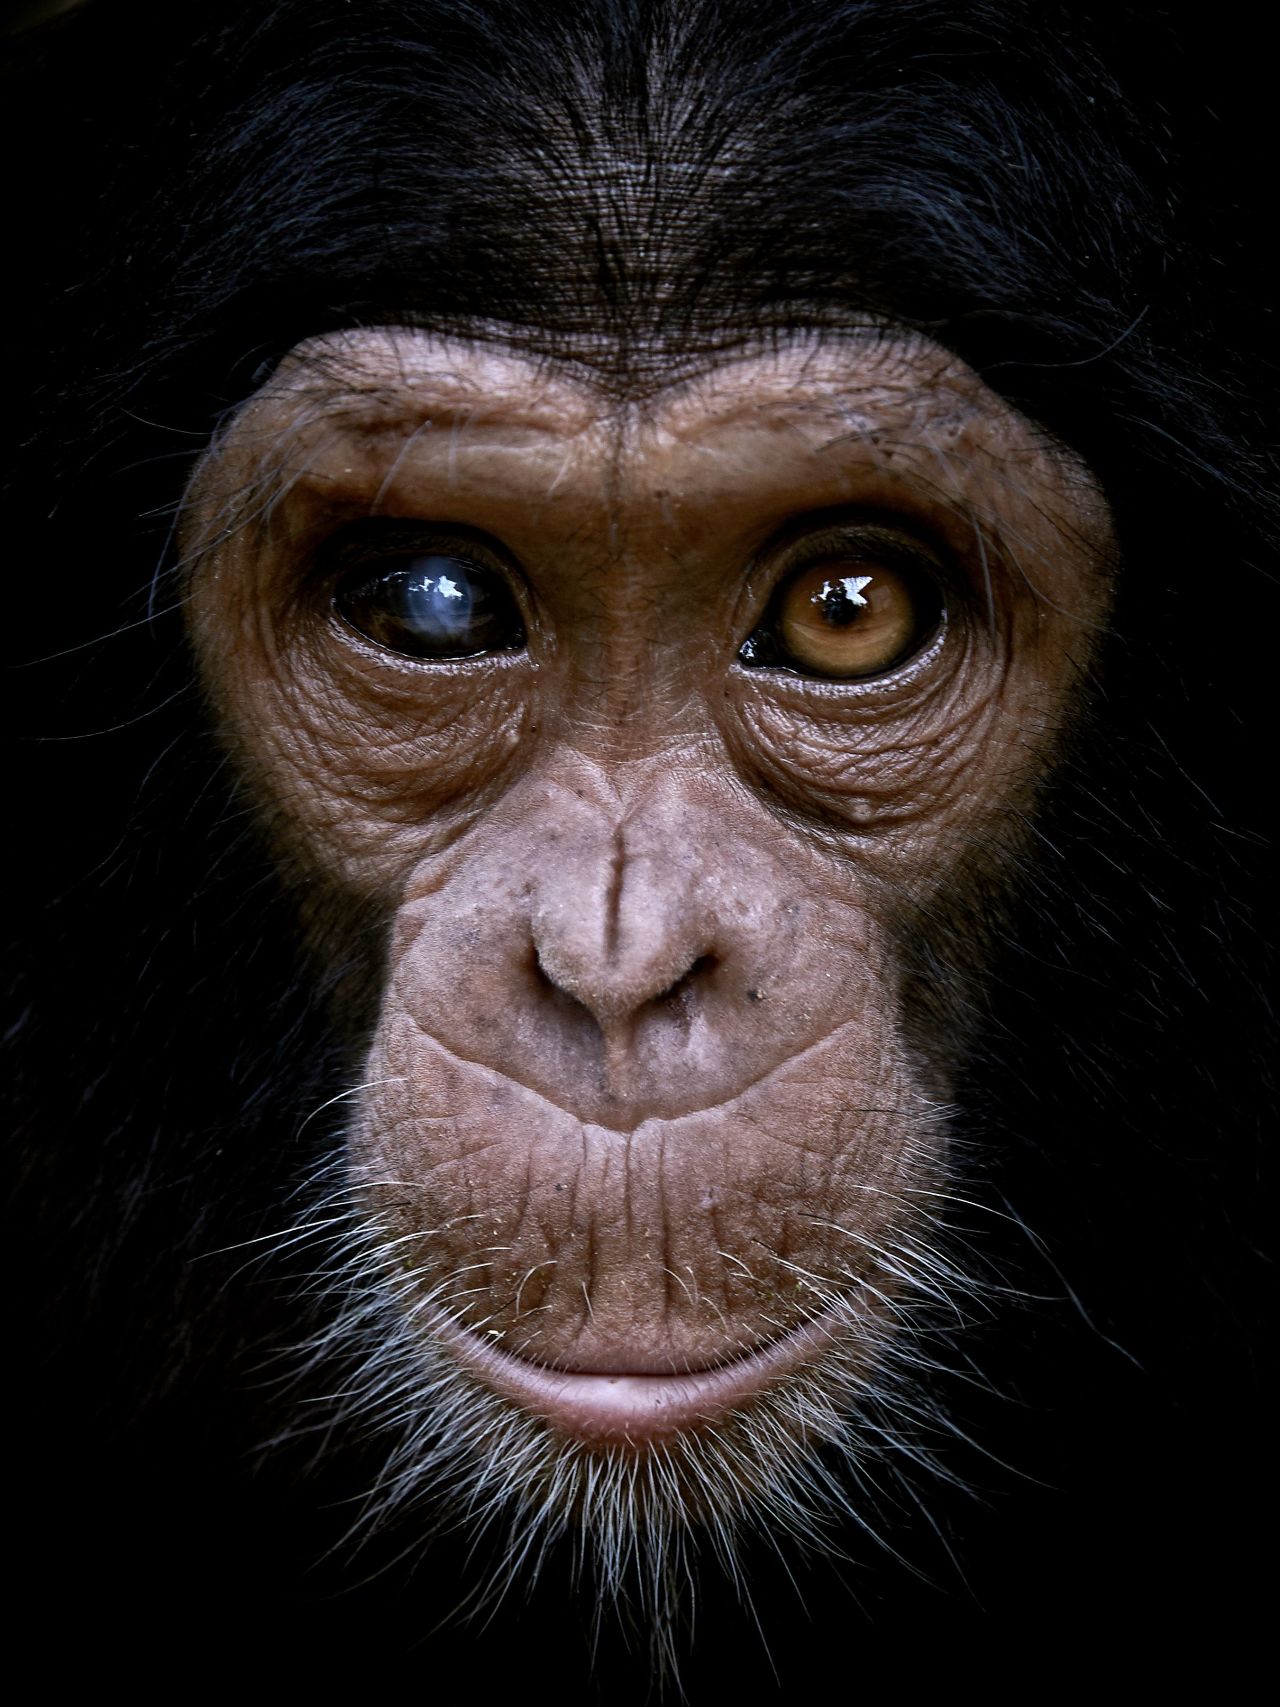 Felix, a baby chimpanzee with sight issues, was recently rescued from poachers in the Democratic Republic of Congo.